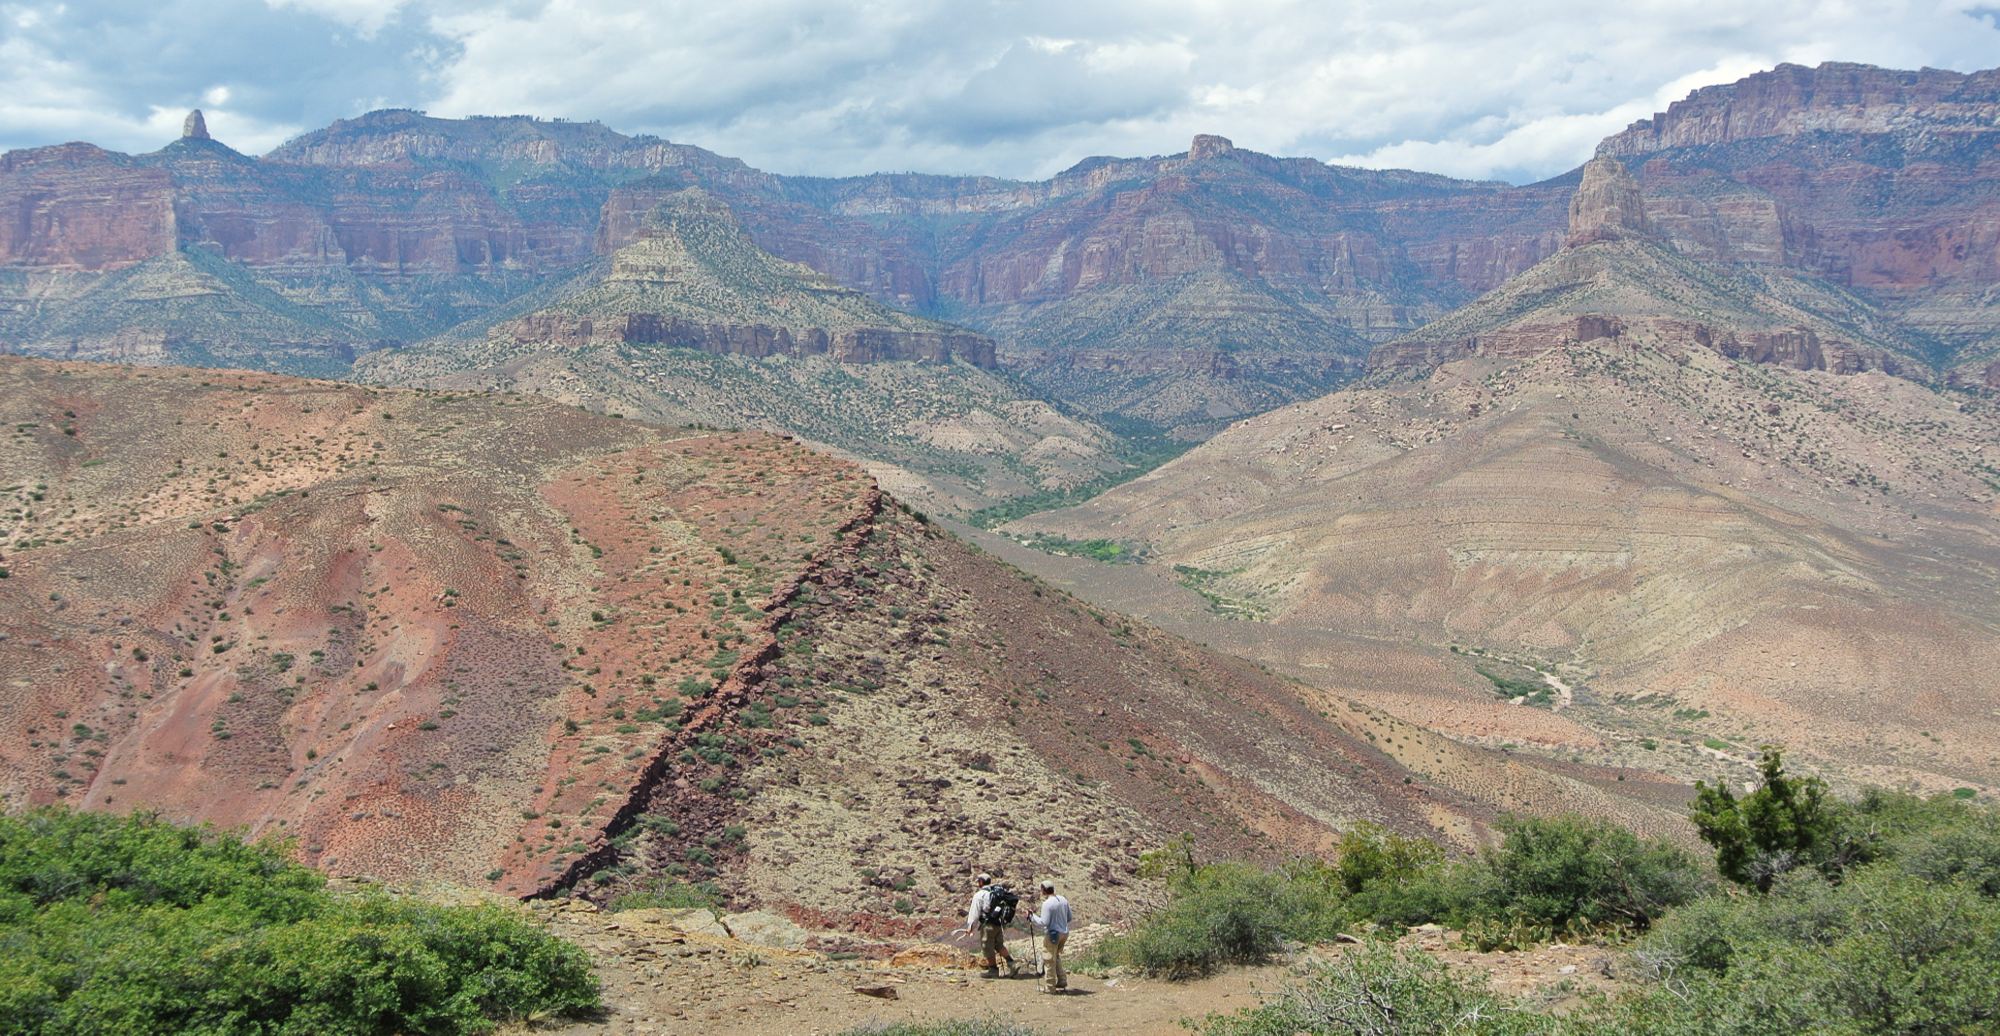 Photo showing two small figures in the foreground in front of large rocky landscape in the Grand Canyon.